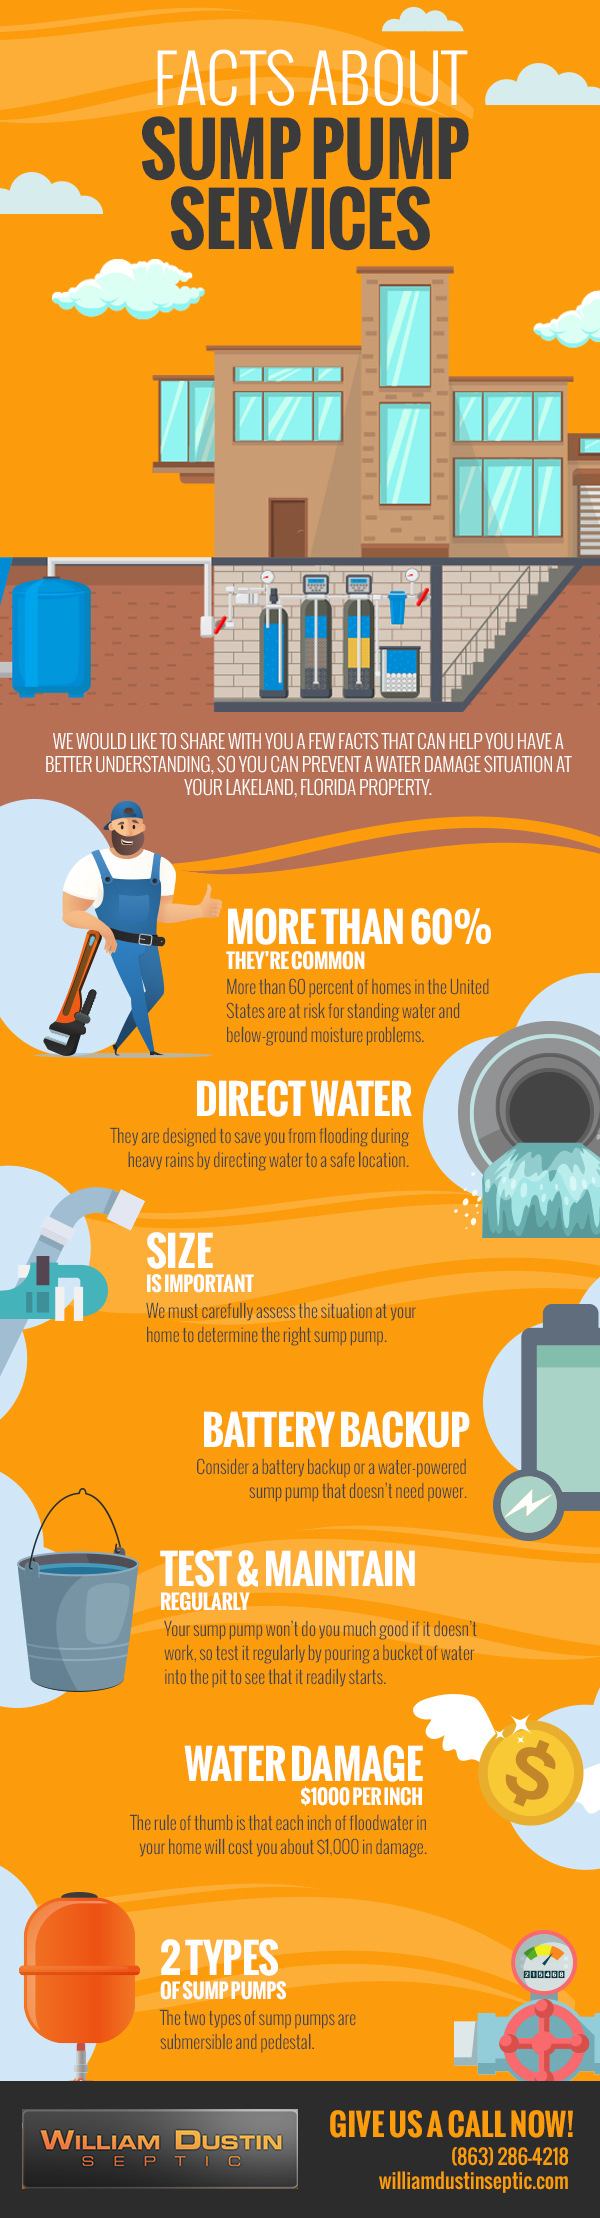 Facts About Sump Pump Services [infographic]